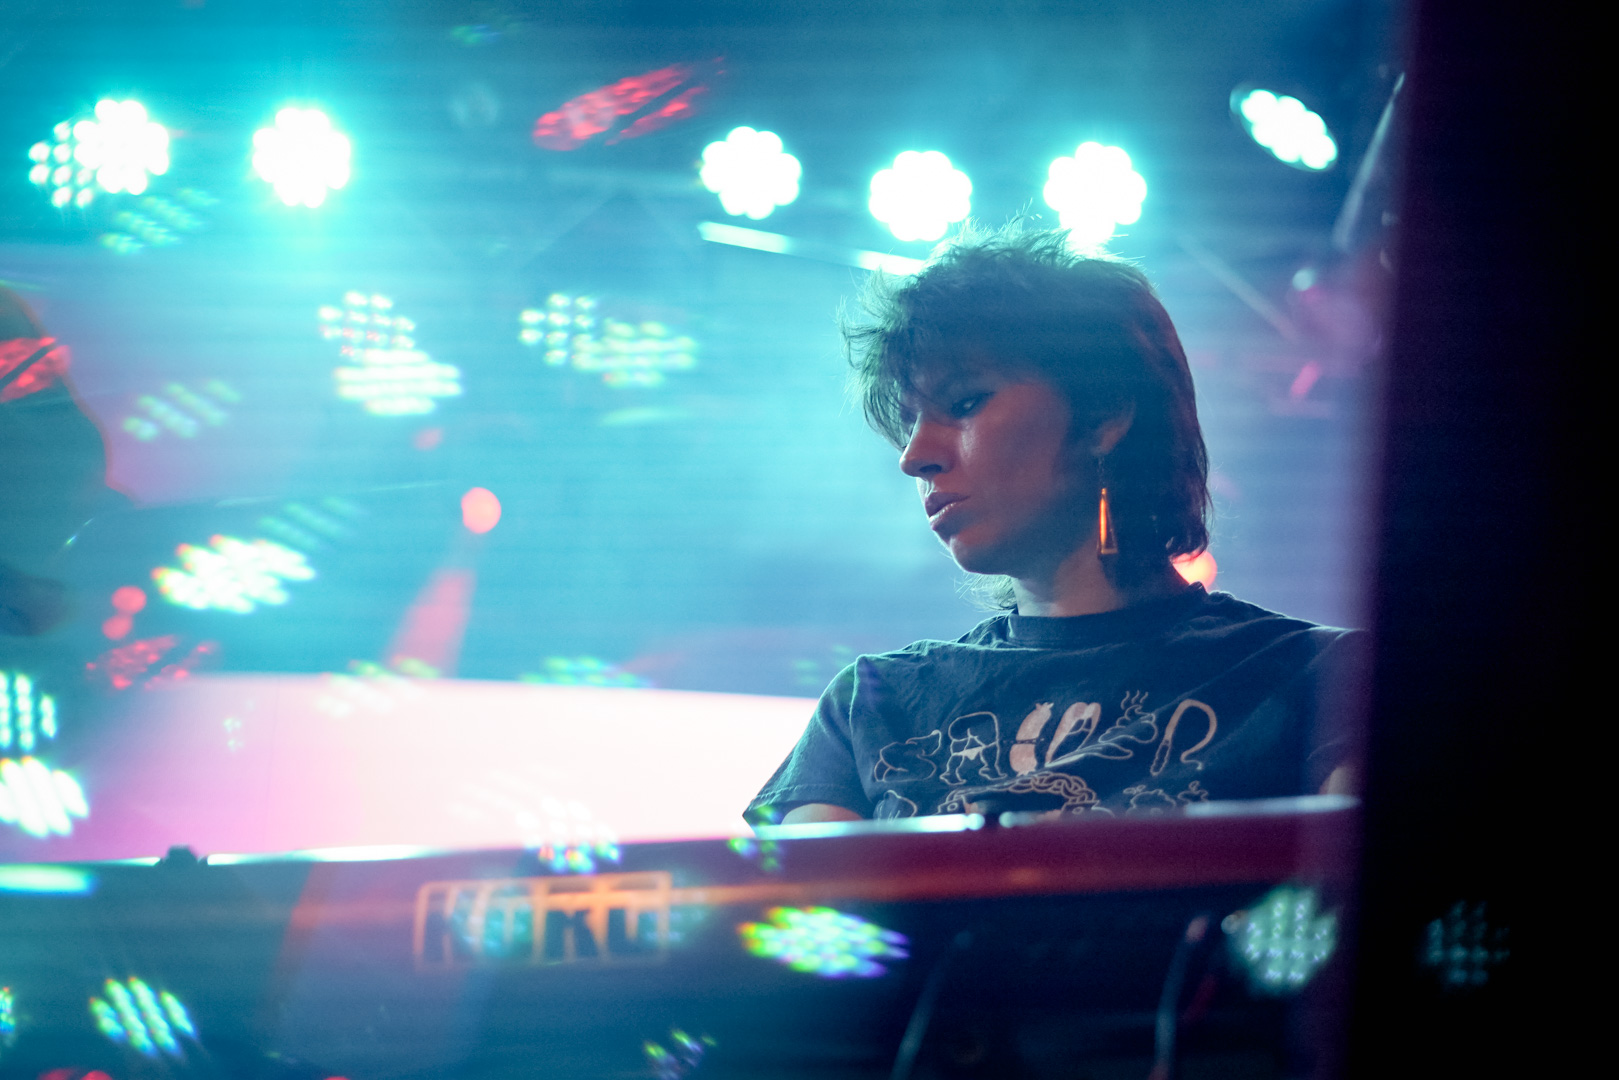 A woman playing keyboard on stage